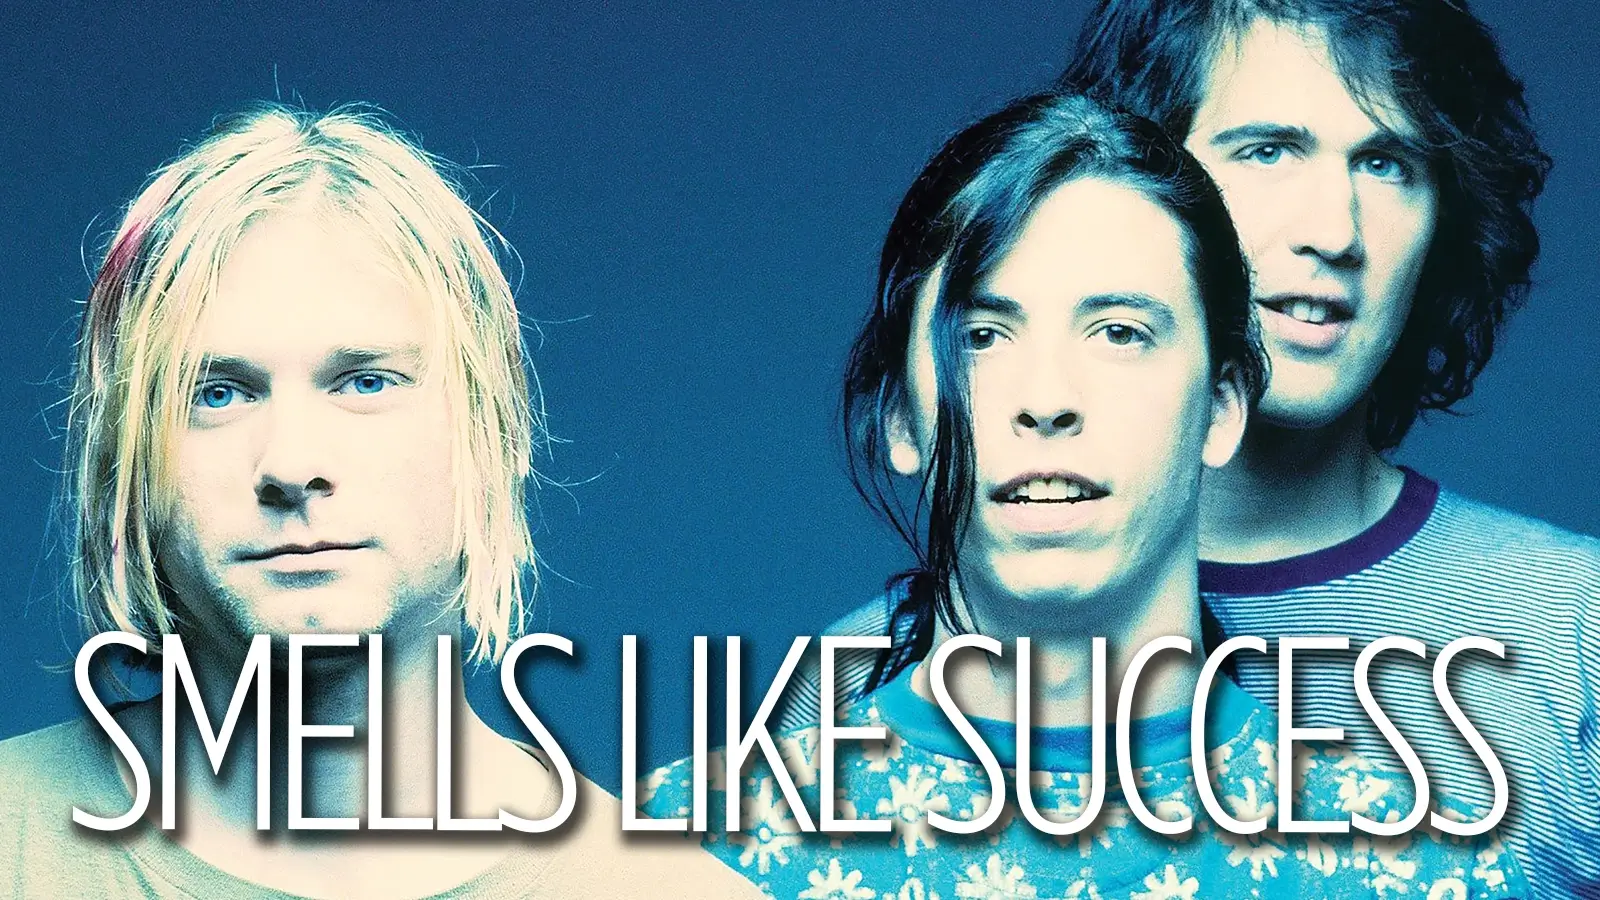 Nirvana's members posing, plus header in a share graphic.